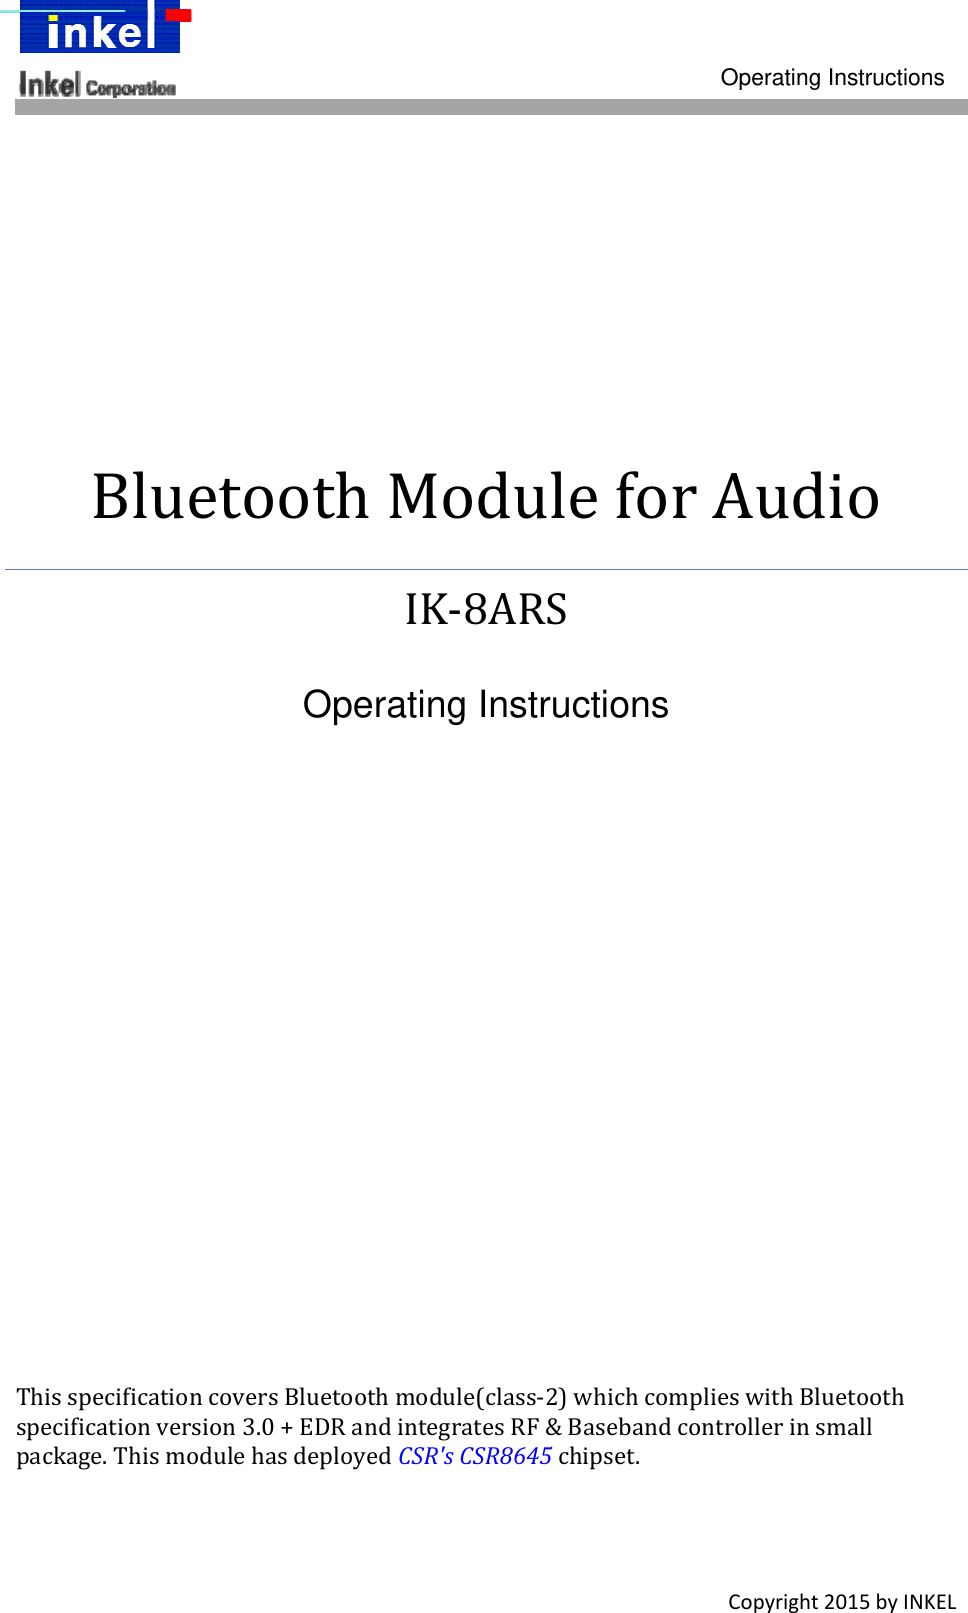   Operating Instructions Copyright2015byINKELBluetoothModuleforAudioIK‐8ARSOperating InstructionsThisspecificationcoversBluetoothmodule(class‐2)whichcomplieswithBluetoothspecificationversion3.0+EDRandintegratesRF&amp;Basebandcontrollerinsmallpackage.ThismodulehasdeployedCSR&apos;sCSR8645chipset.